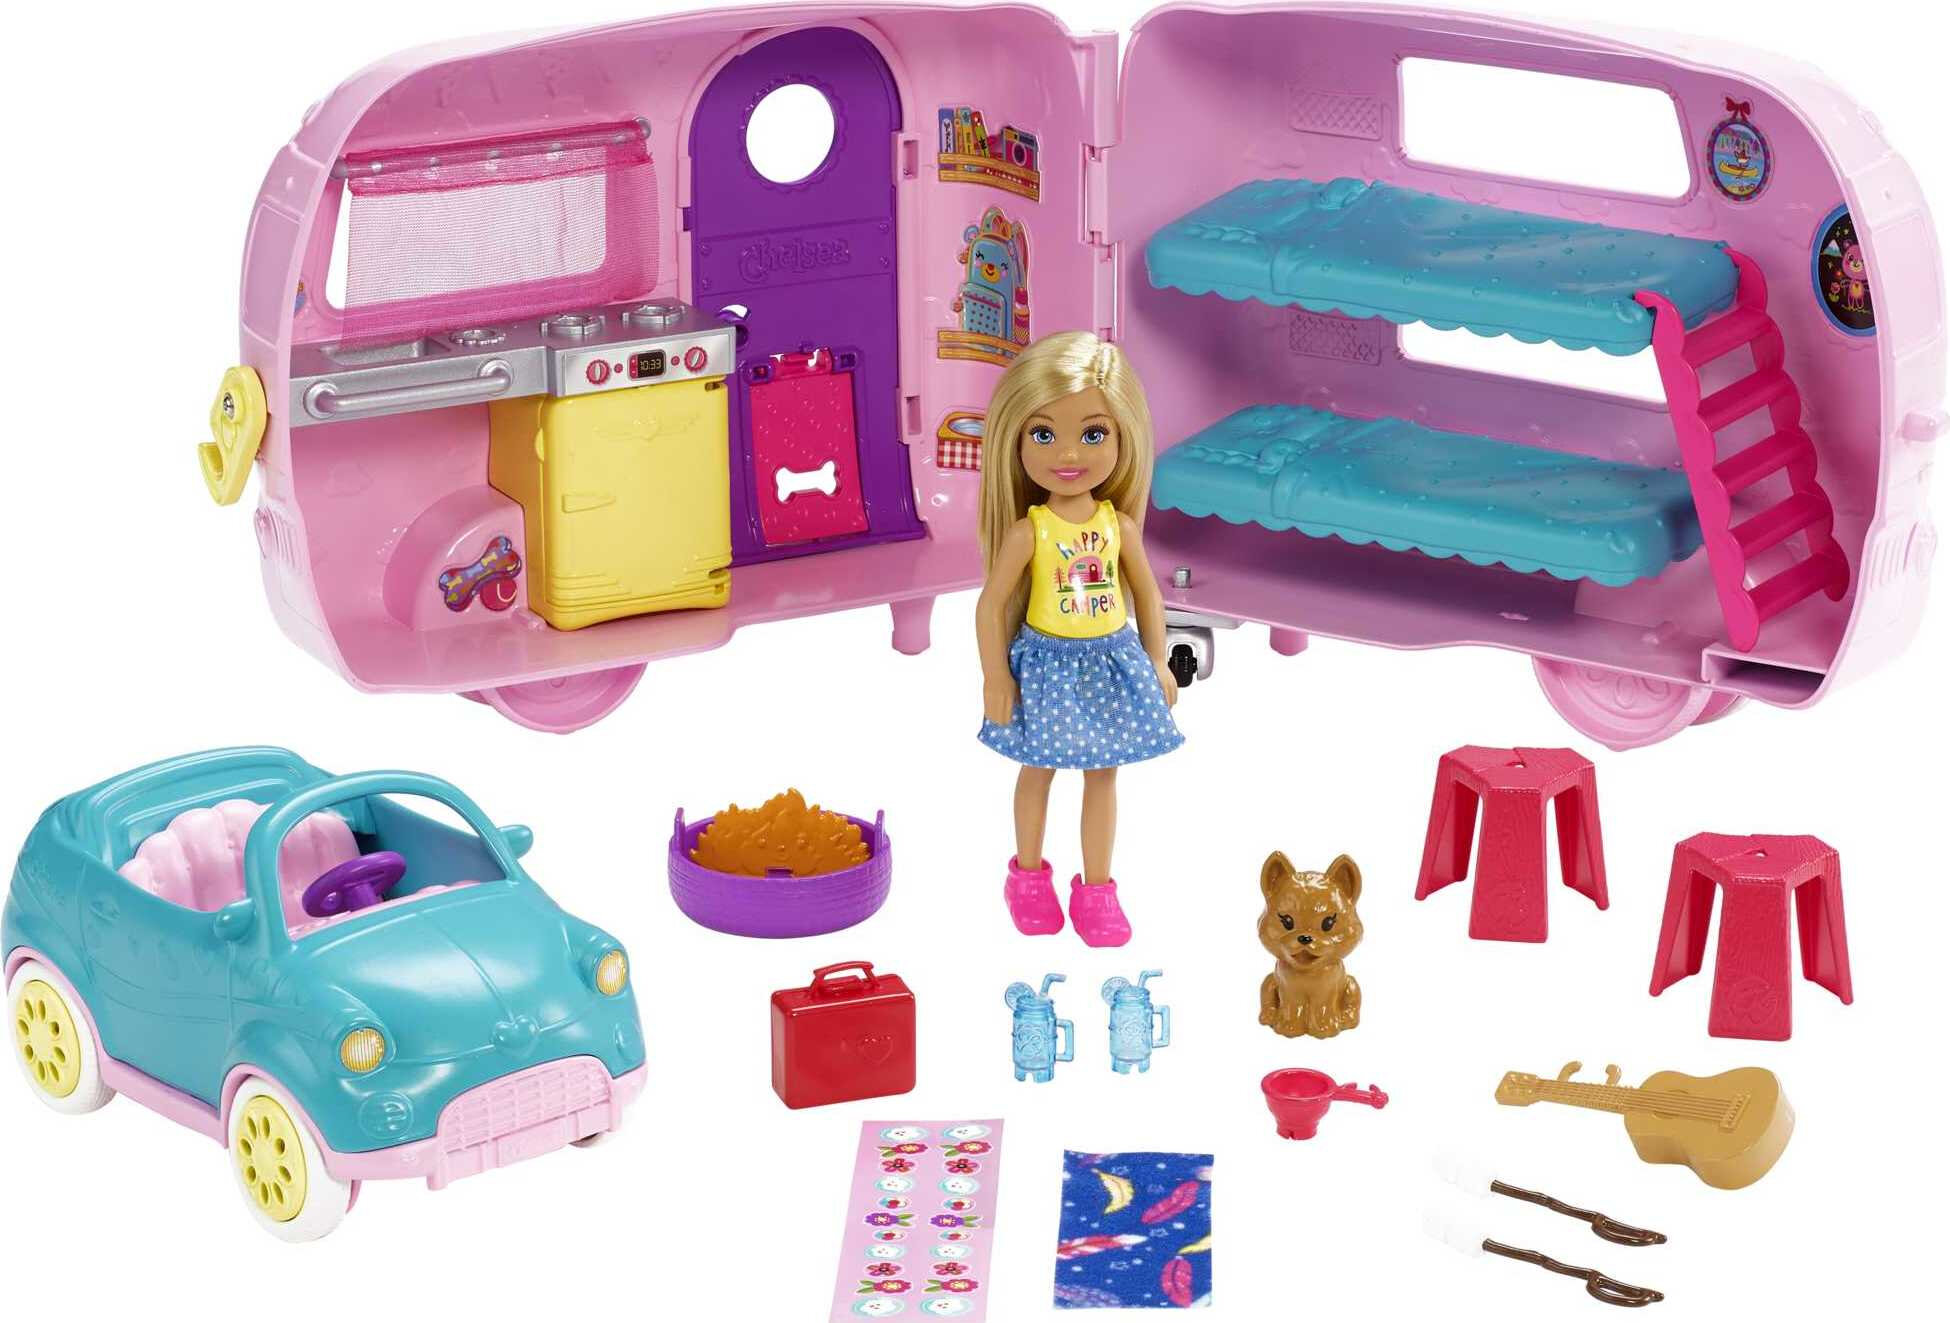 Barbie Club Chelsea Pink Camper Playset, Blonde Small Doll, Pet, Car & 10+ Accessories, Toy for 3 Years and Up - image 1 of 8